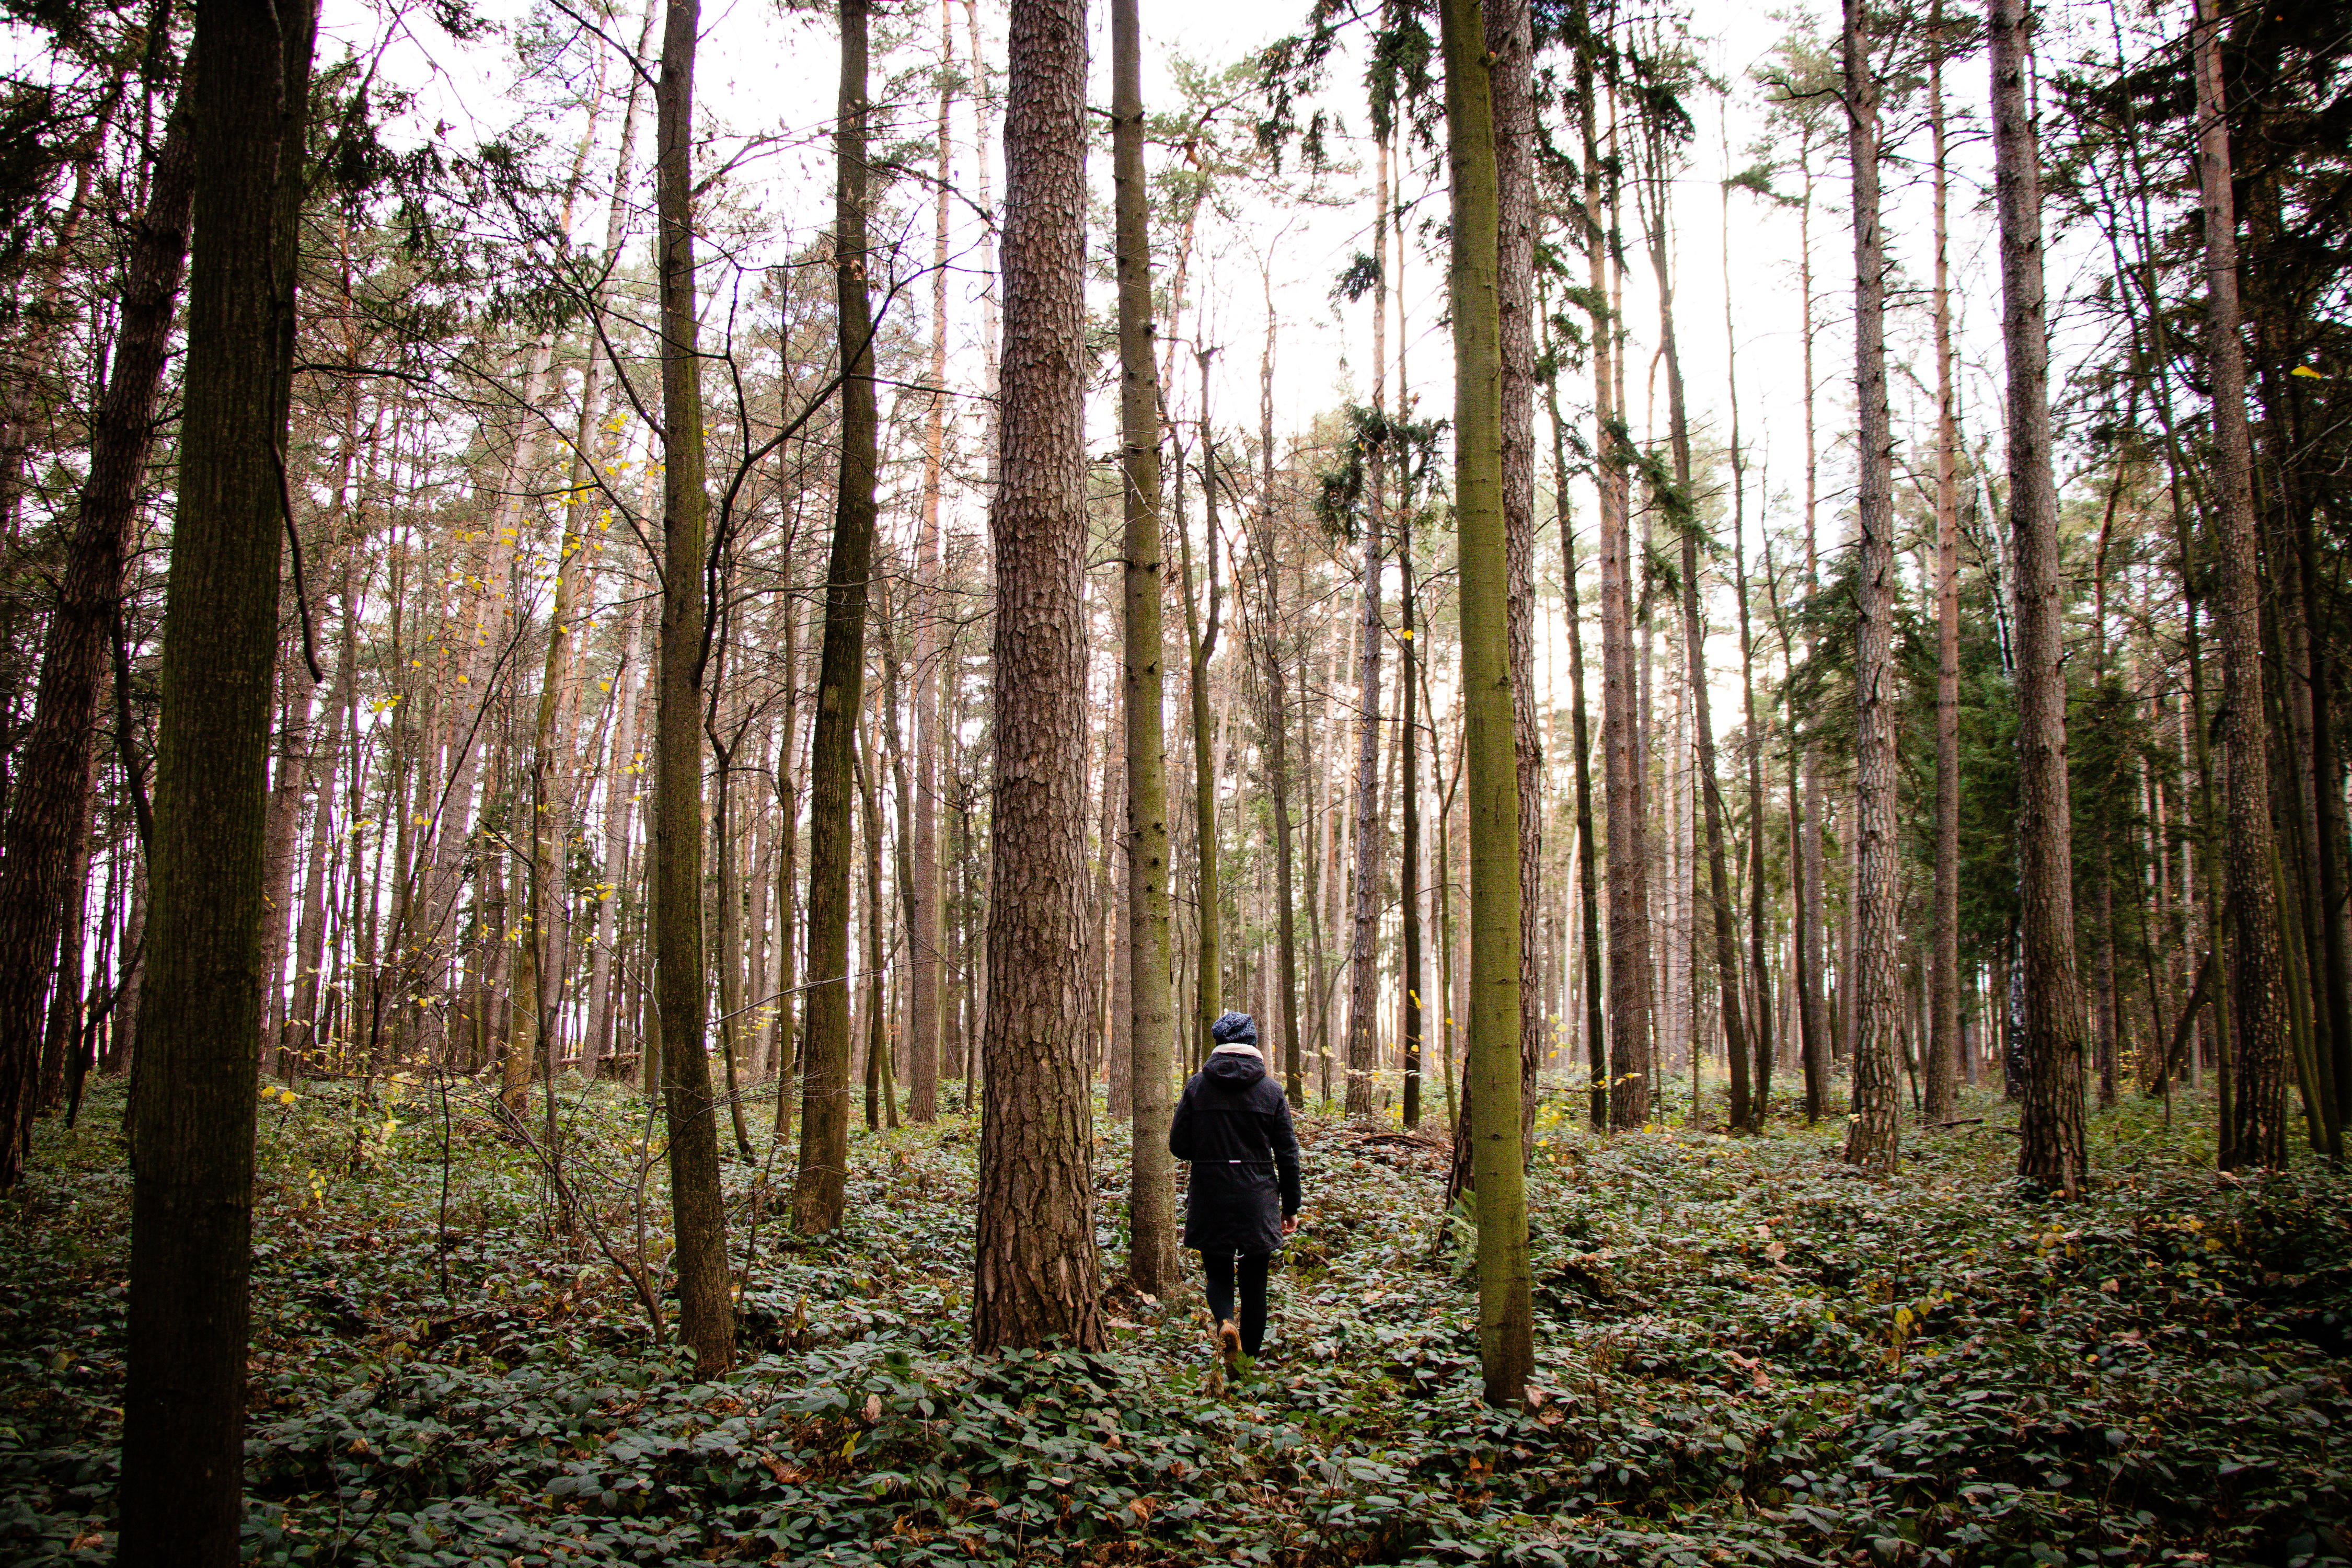 A person stands with the back to the camera in a wooded area